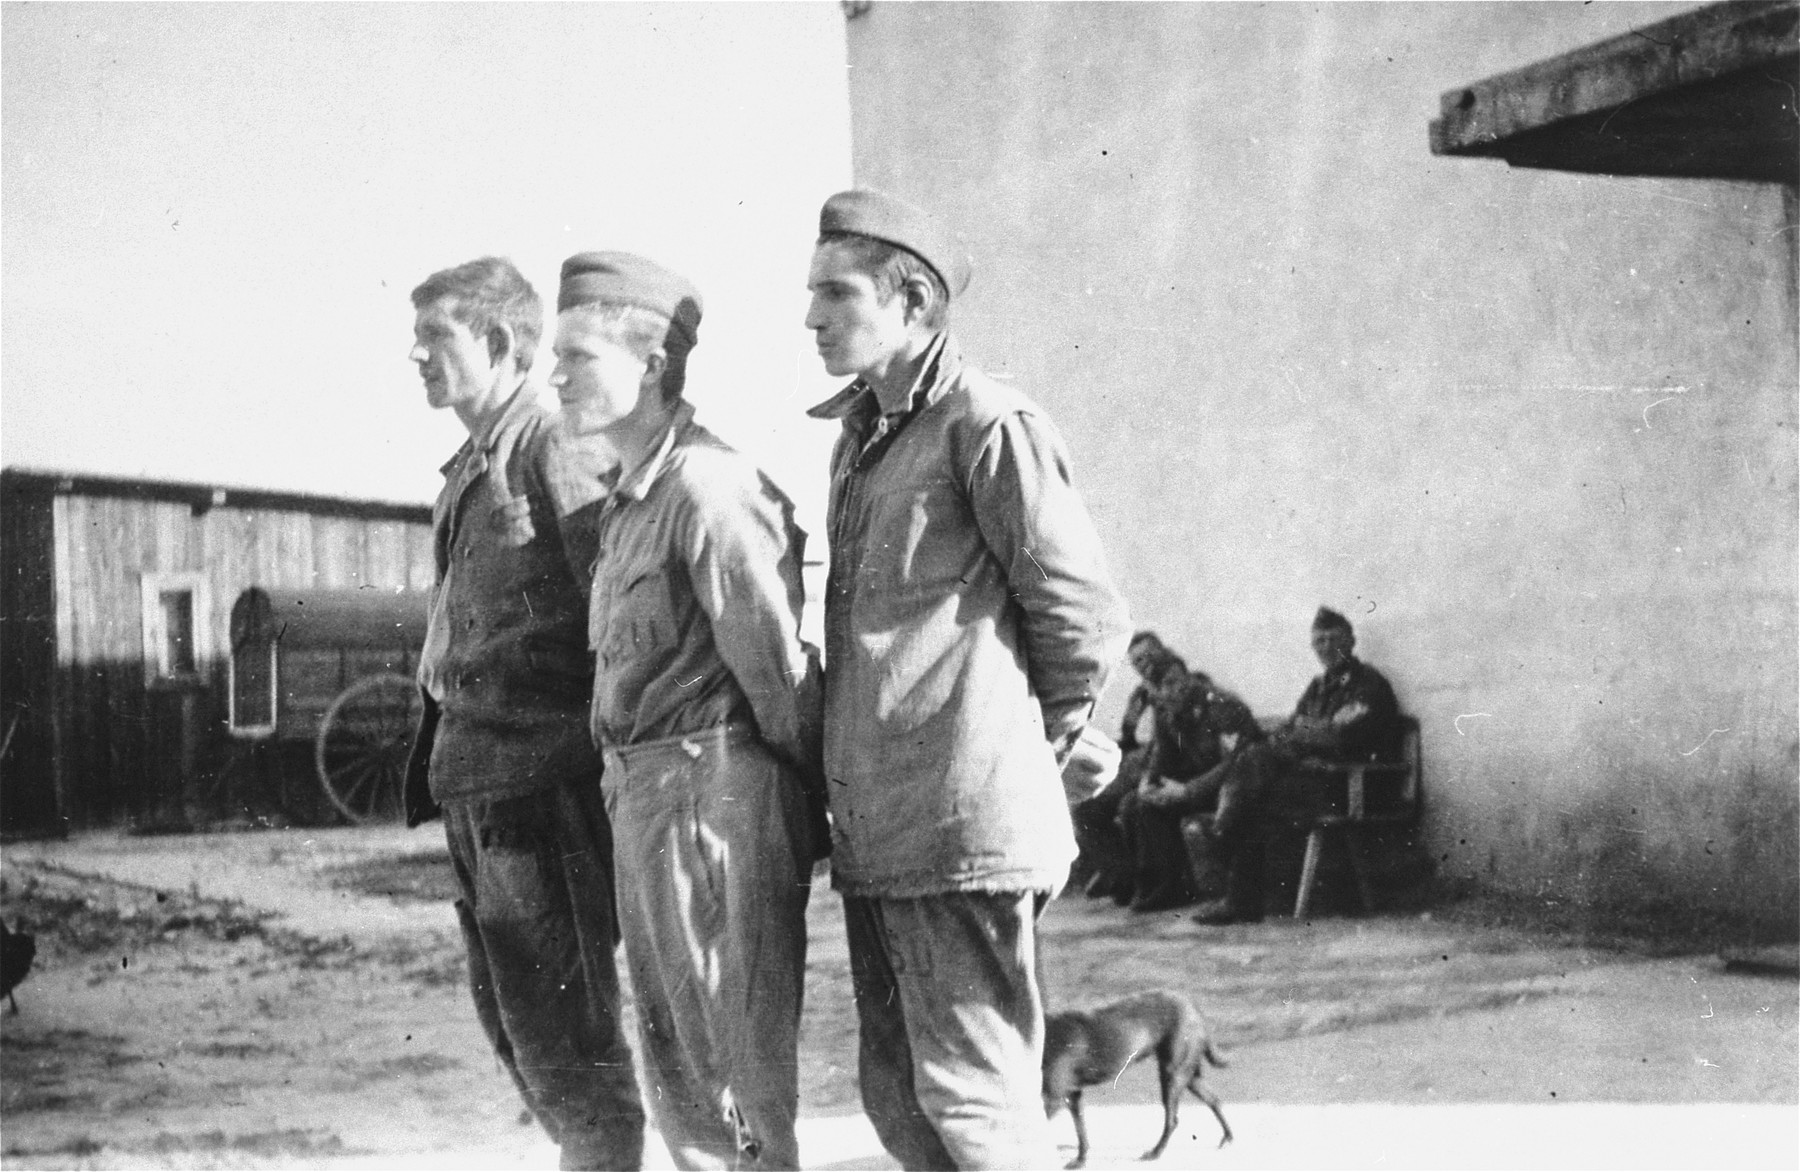 Three Soviet POWs who were captured near Wisznice, stand with their hands tied behind their back.  They were later executed in the Lyniewski Forest.